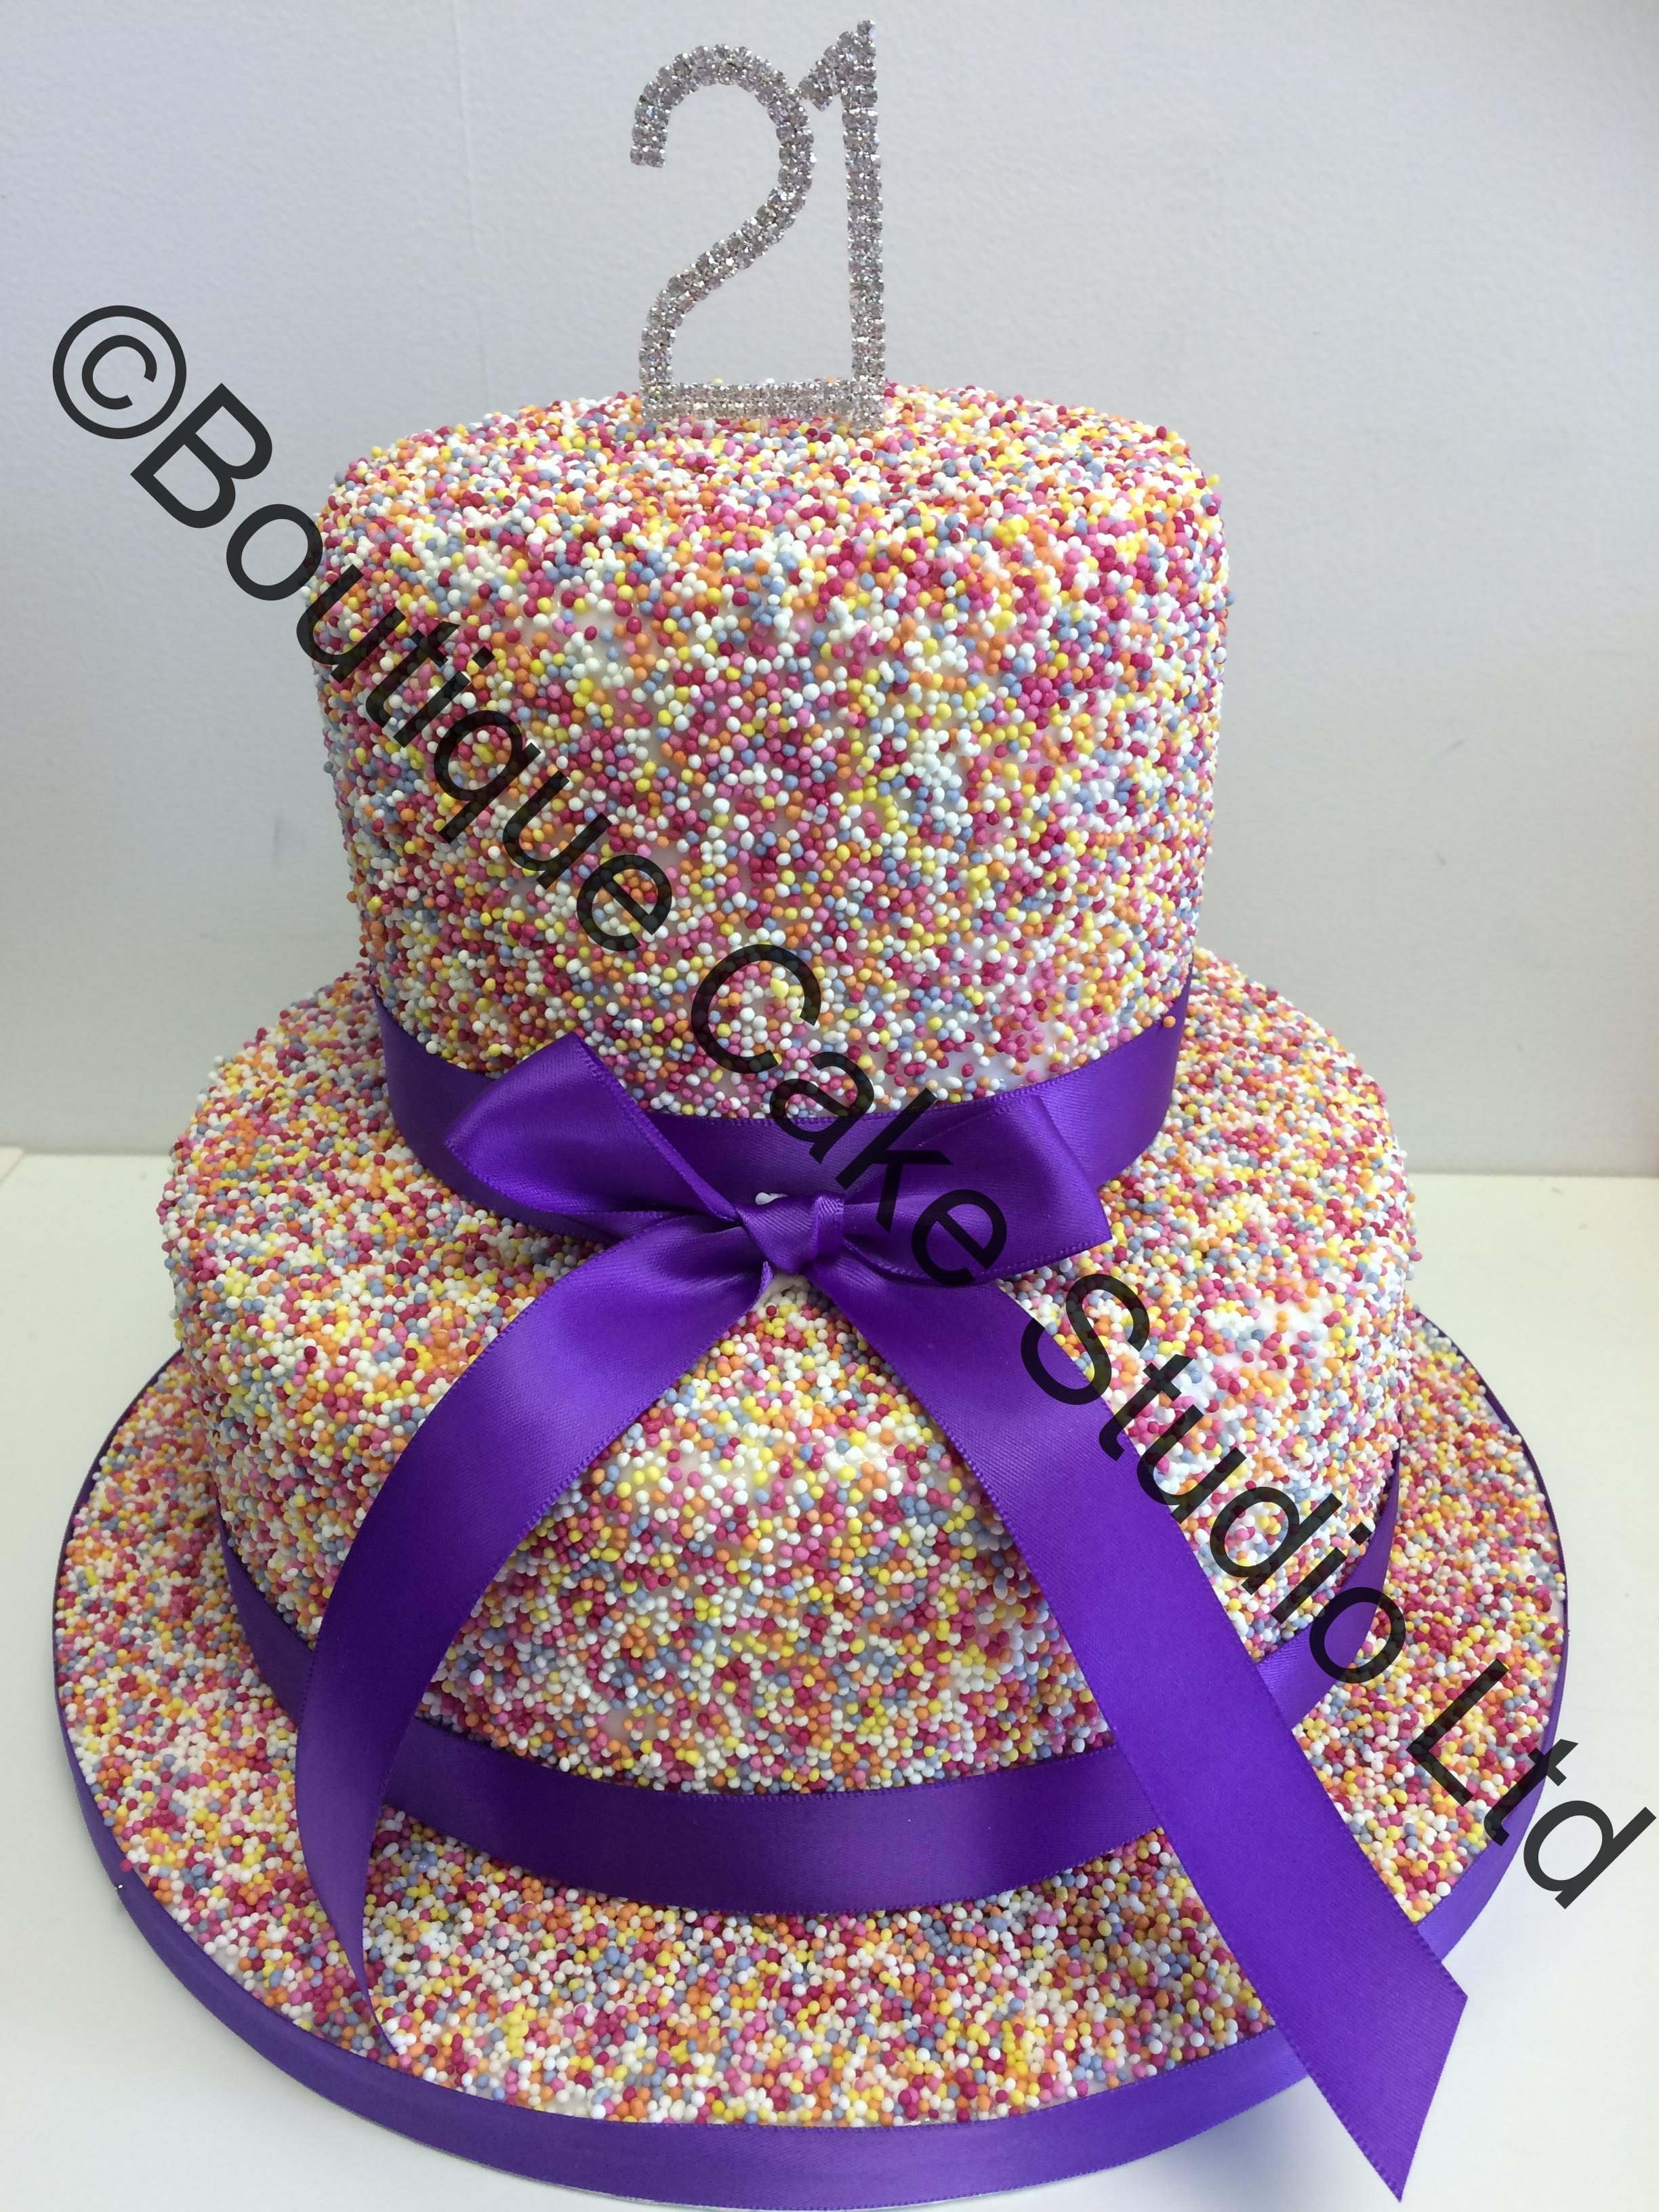 Sprinkle covered stacked cake